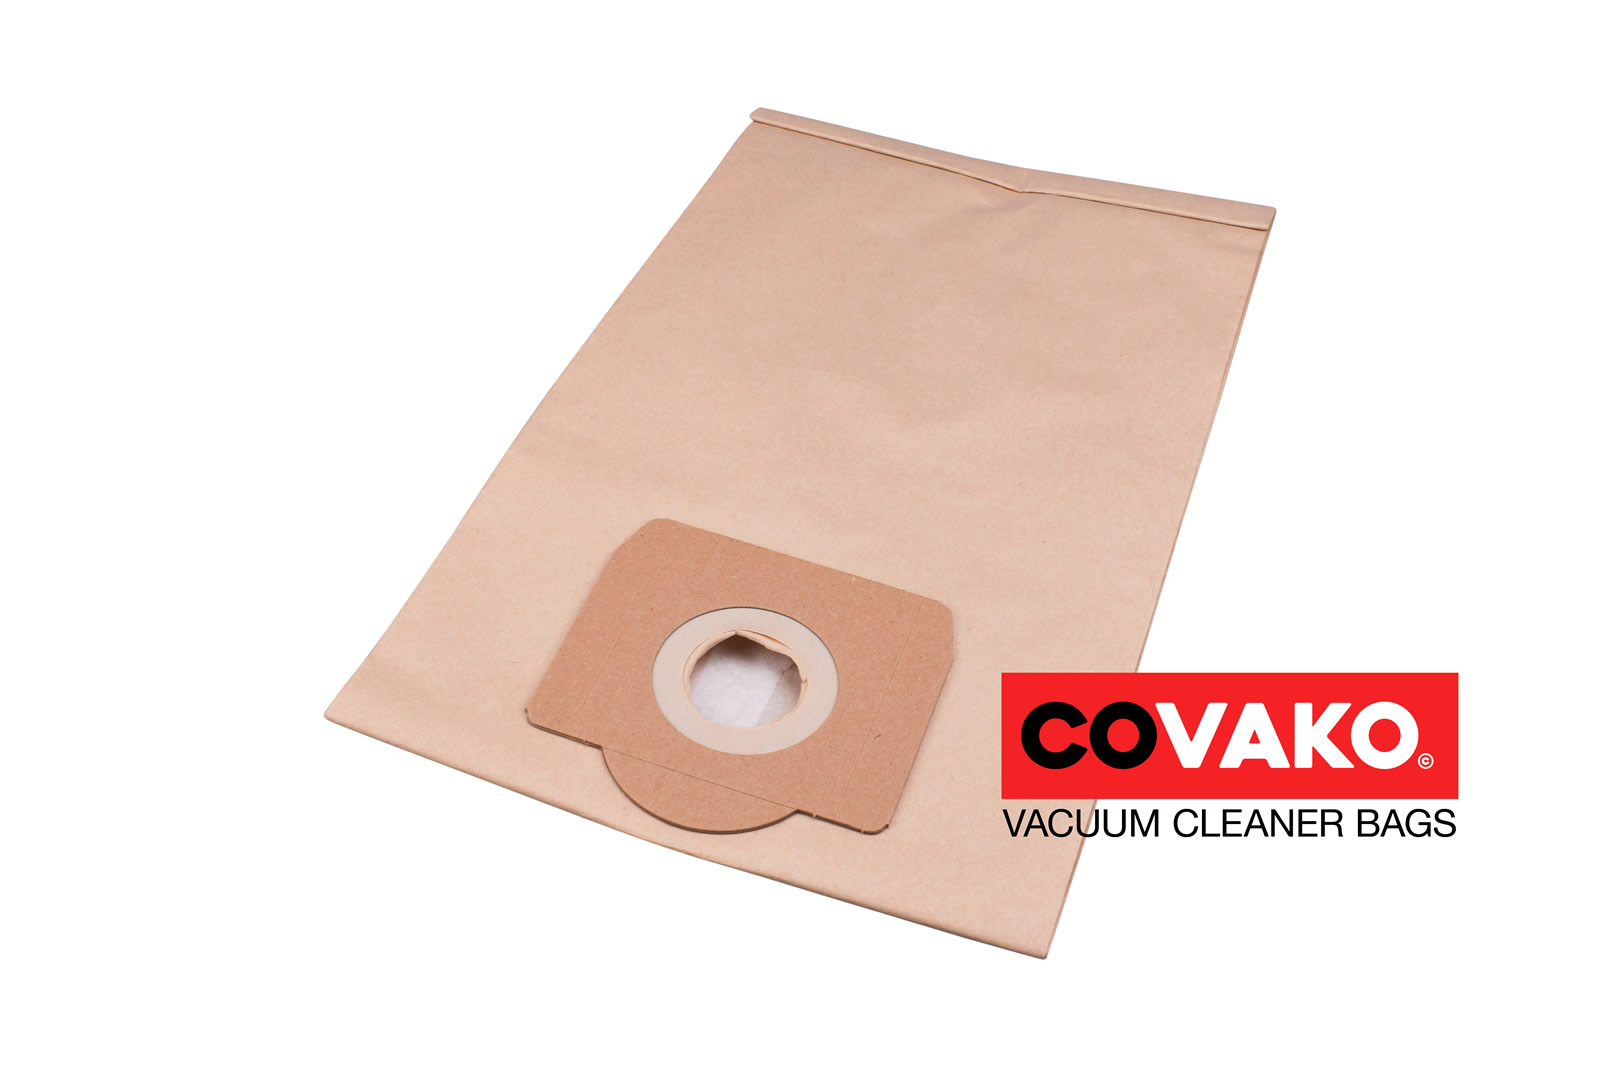 ICA GP 1/16 ECO A / Paper - ICA vacuum cleaner bags